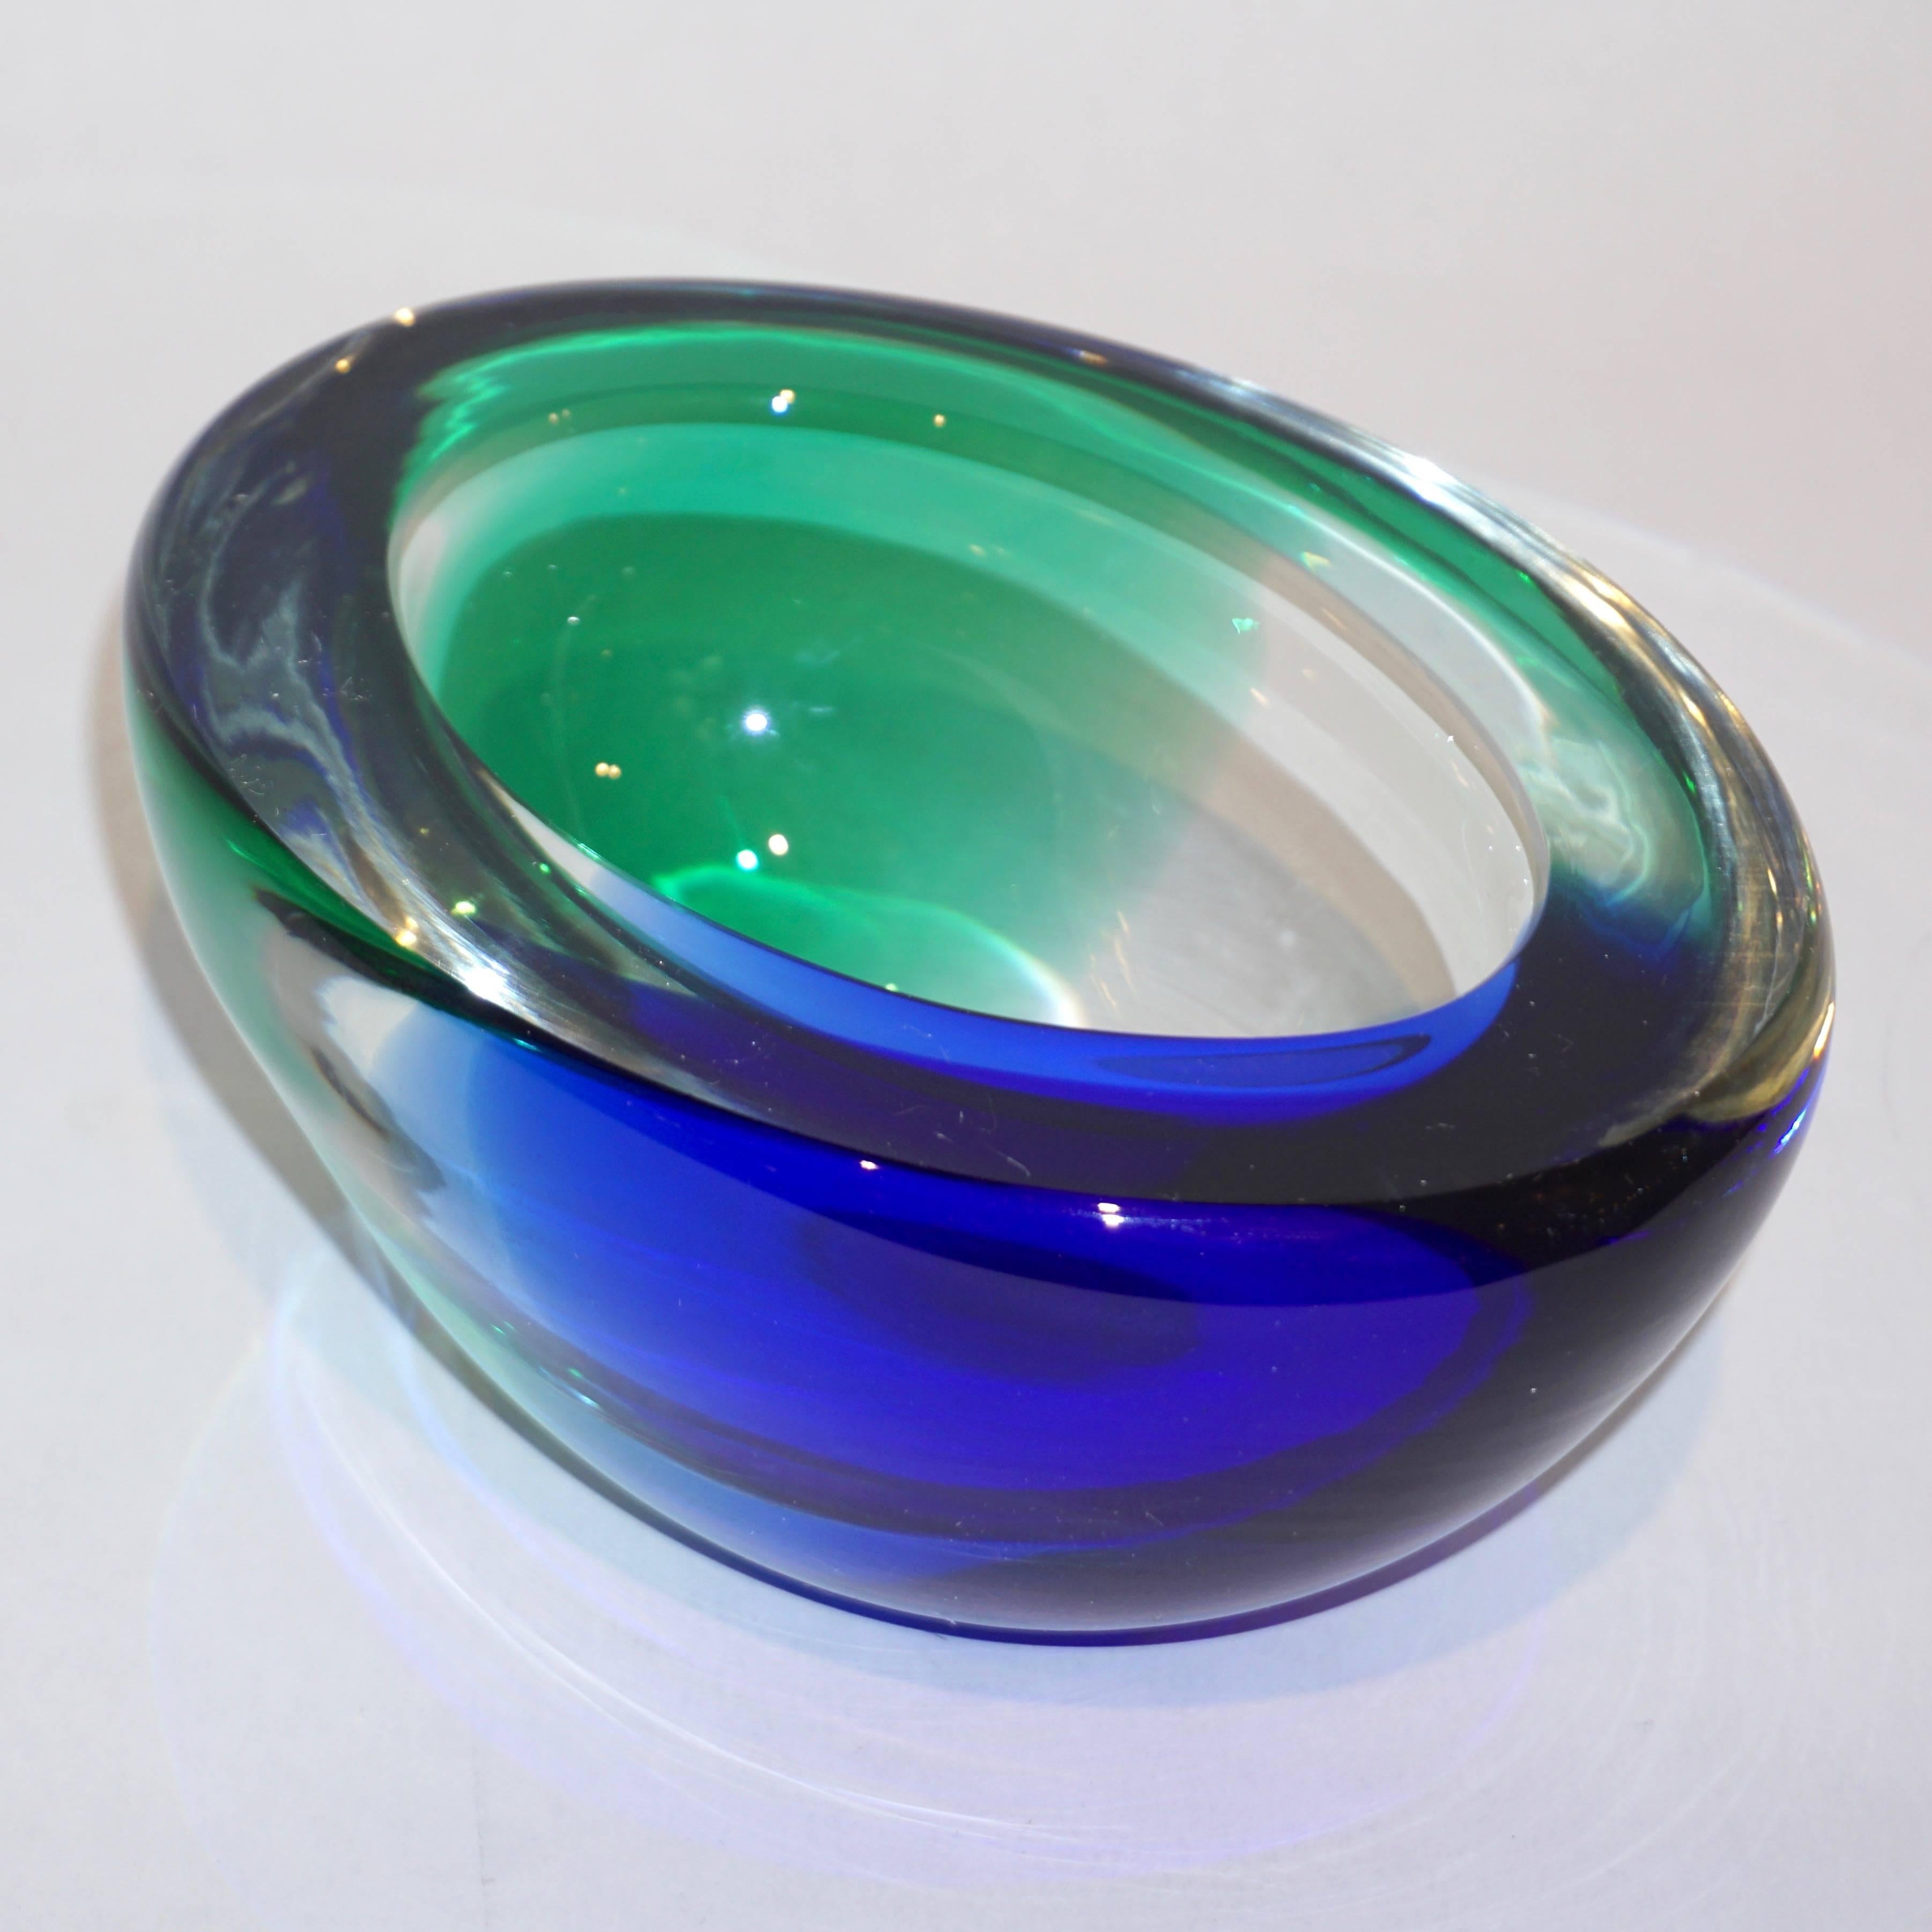 Vintage organic modern 1970s blown Murano glass bowl or catchall dish in emerald green and cobalt blue, signed by Venini, elegantly decorated in patch colors that catch the light and enhanced the shape with flat cut polished top. Also, available in